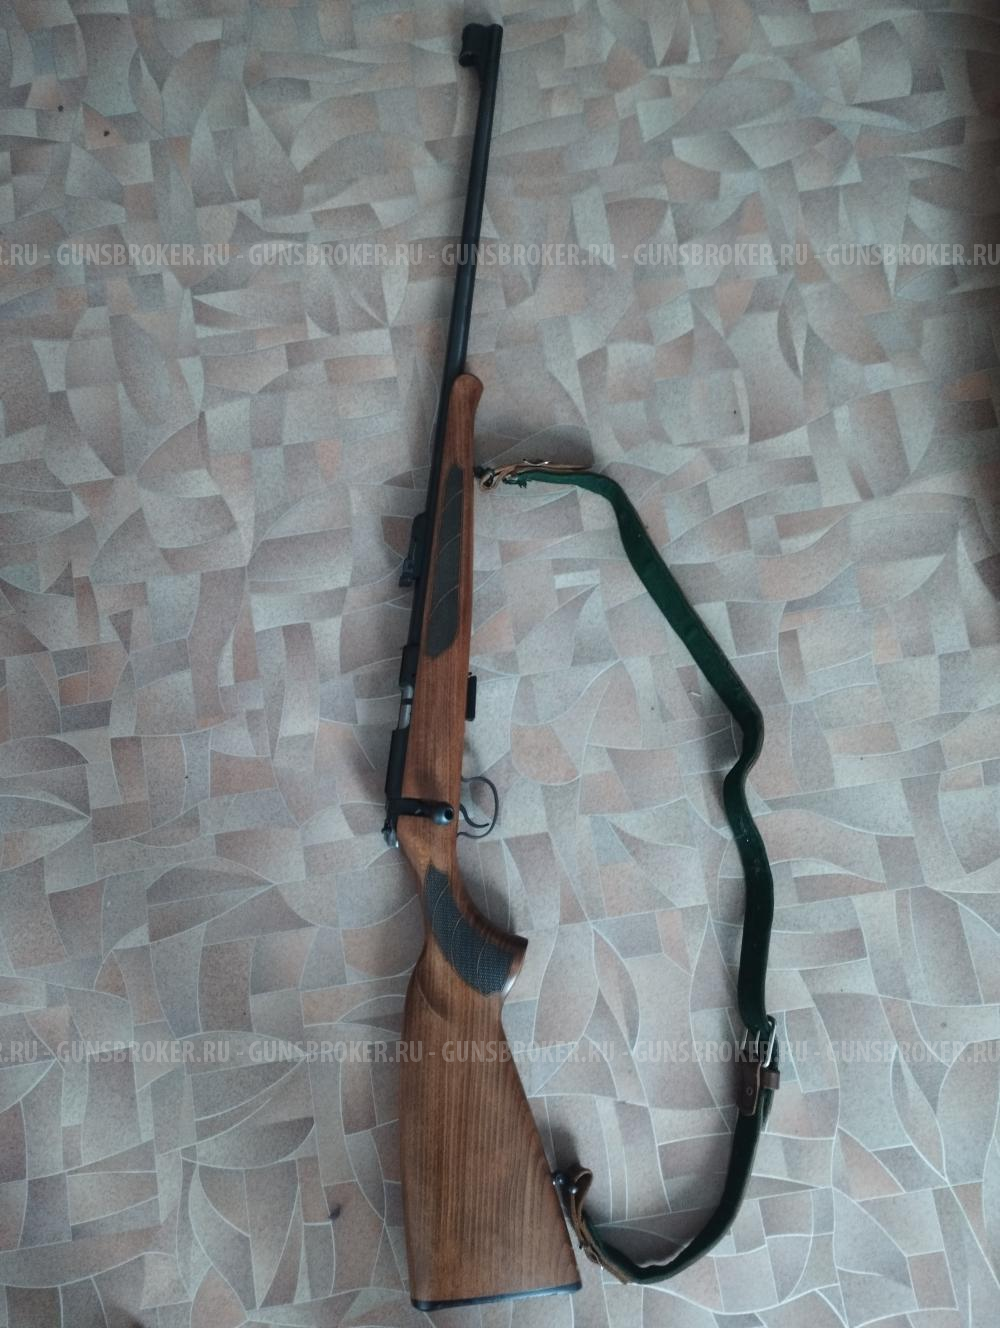 CZ455 forest edition